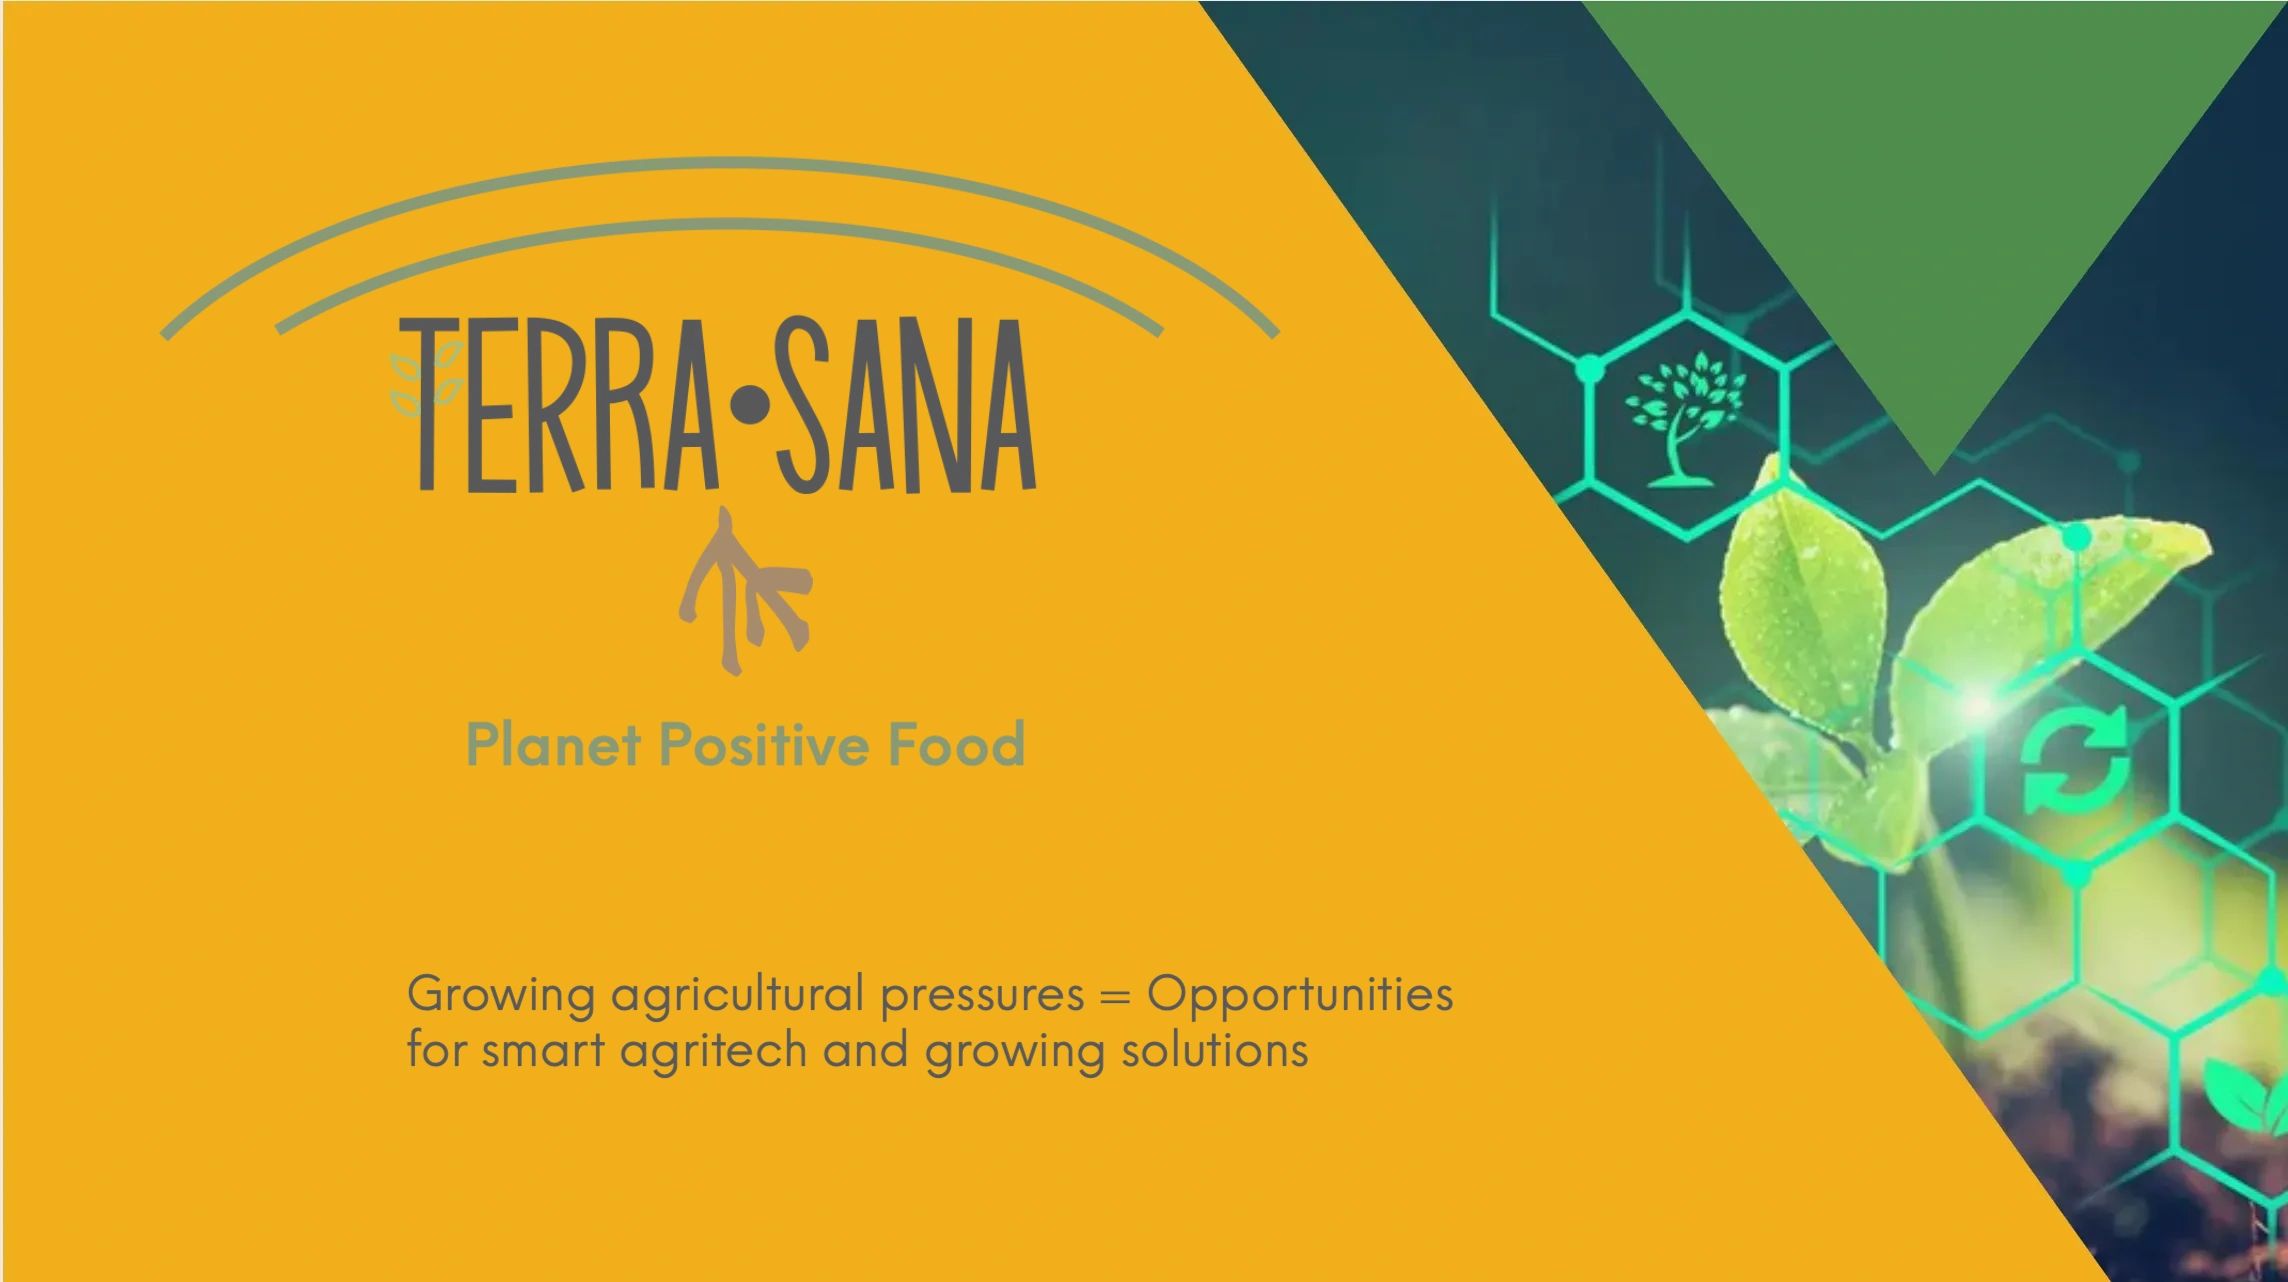 Terra Sana brand mark on a background with plant and agri-tech symbols